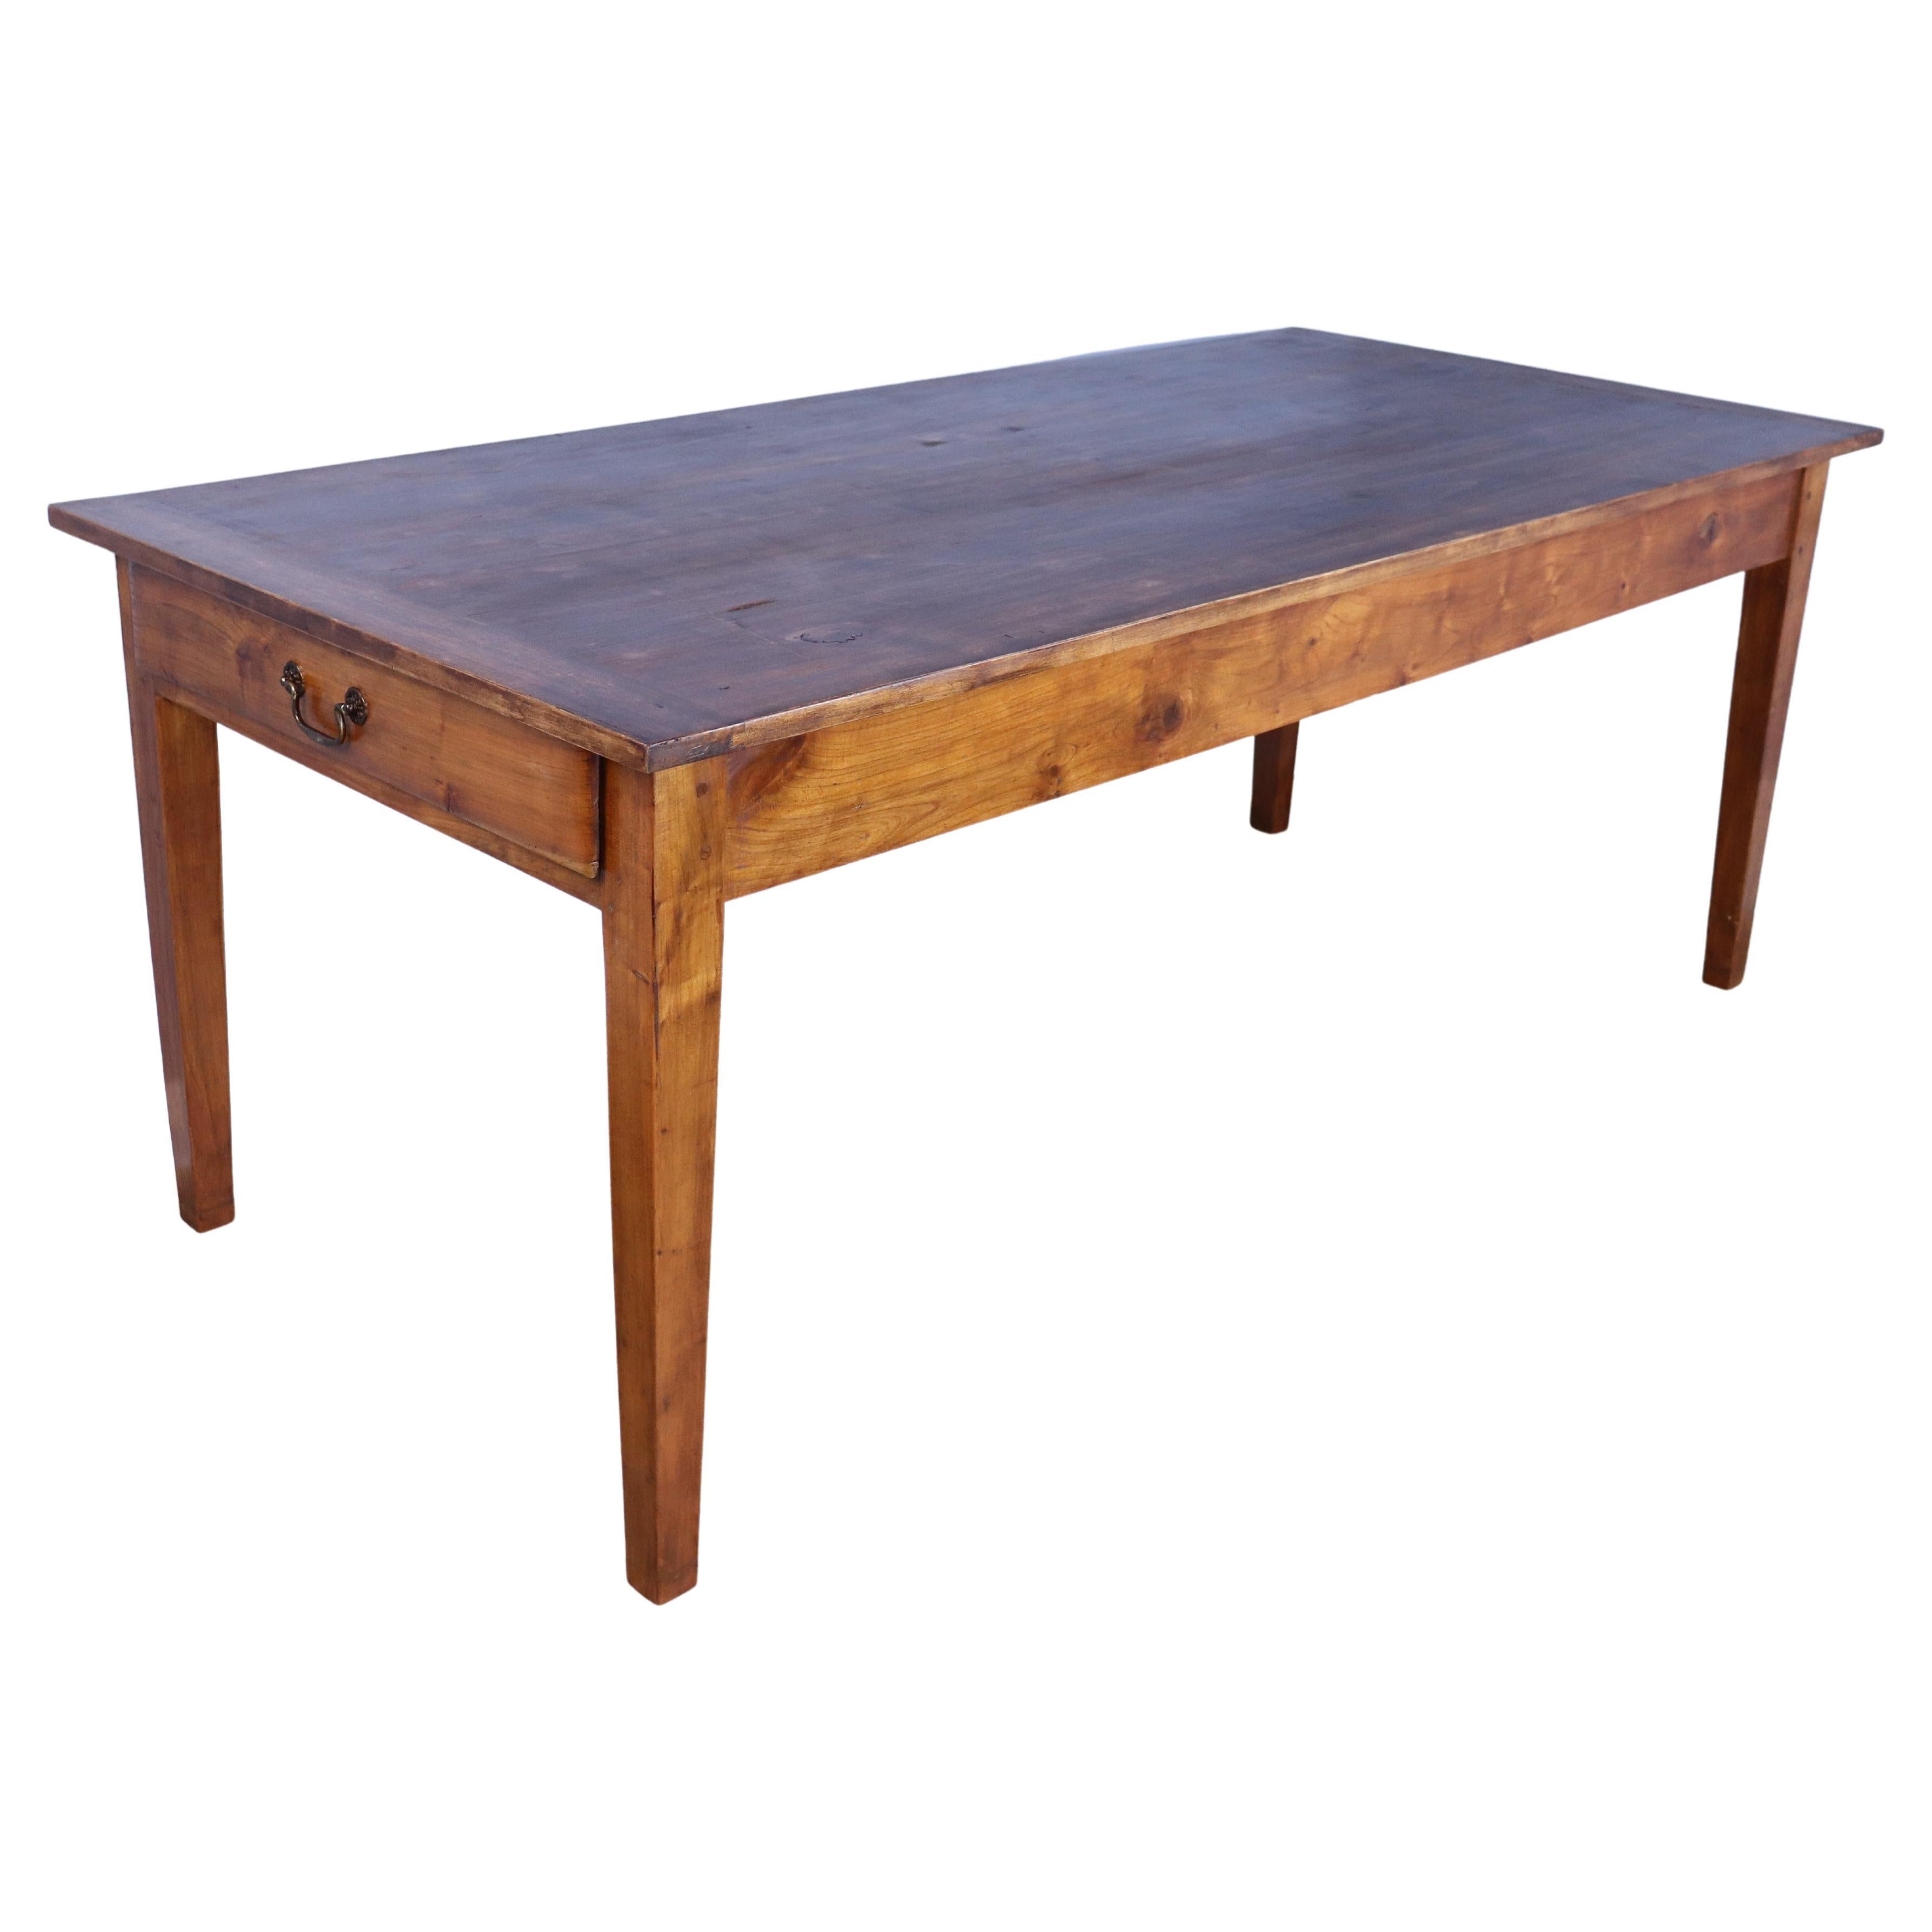 Country Fruitwood Farm Table, One Drawer and Breadboard Ends